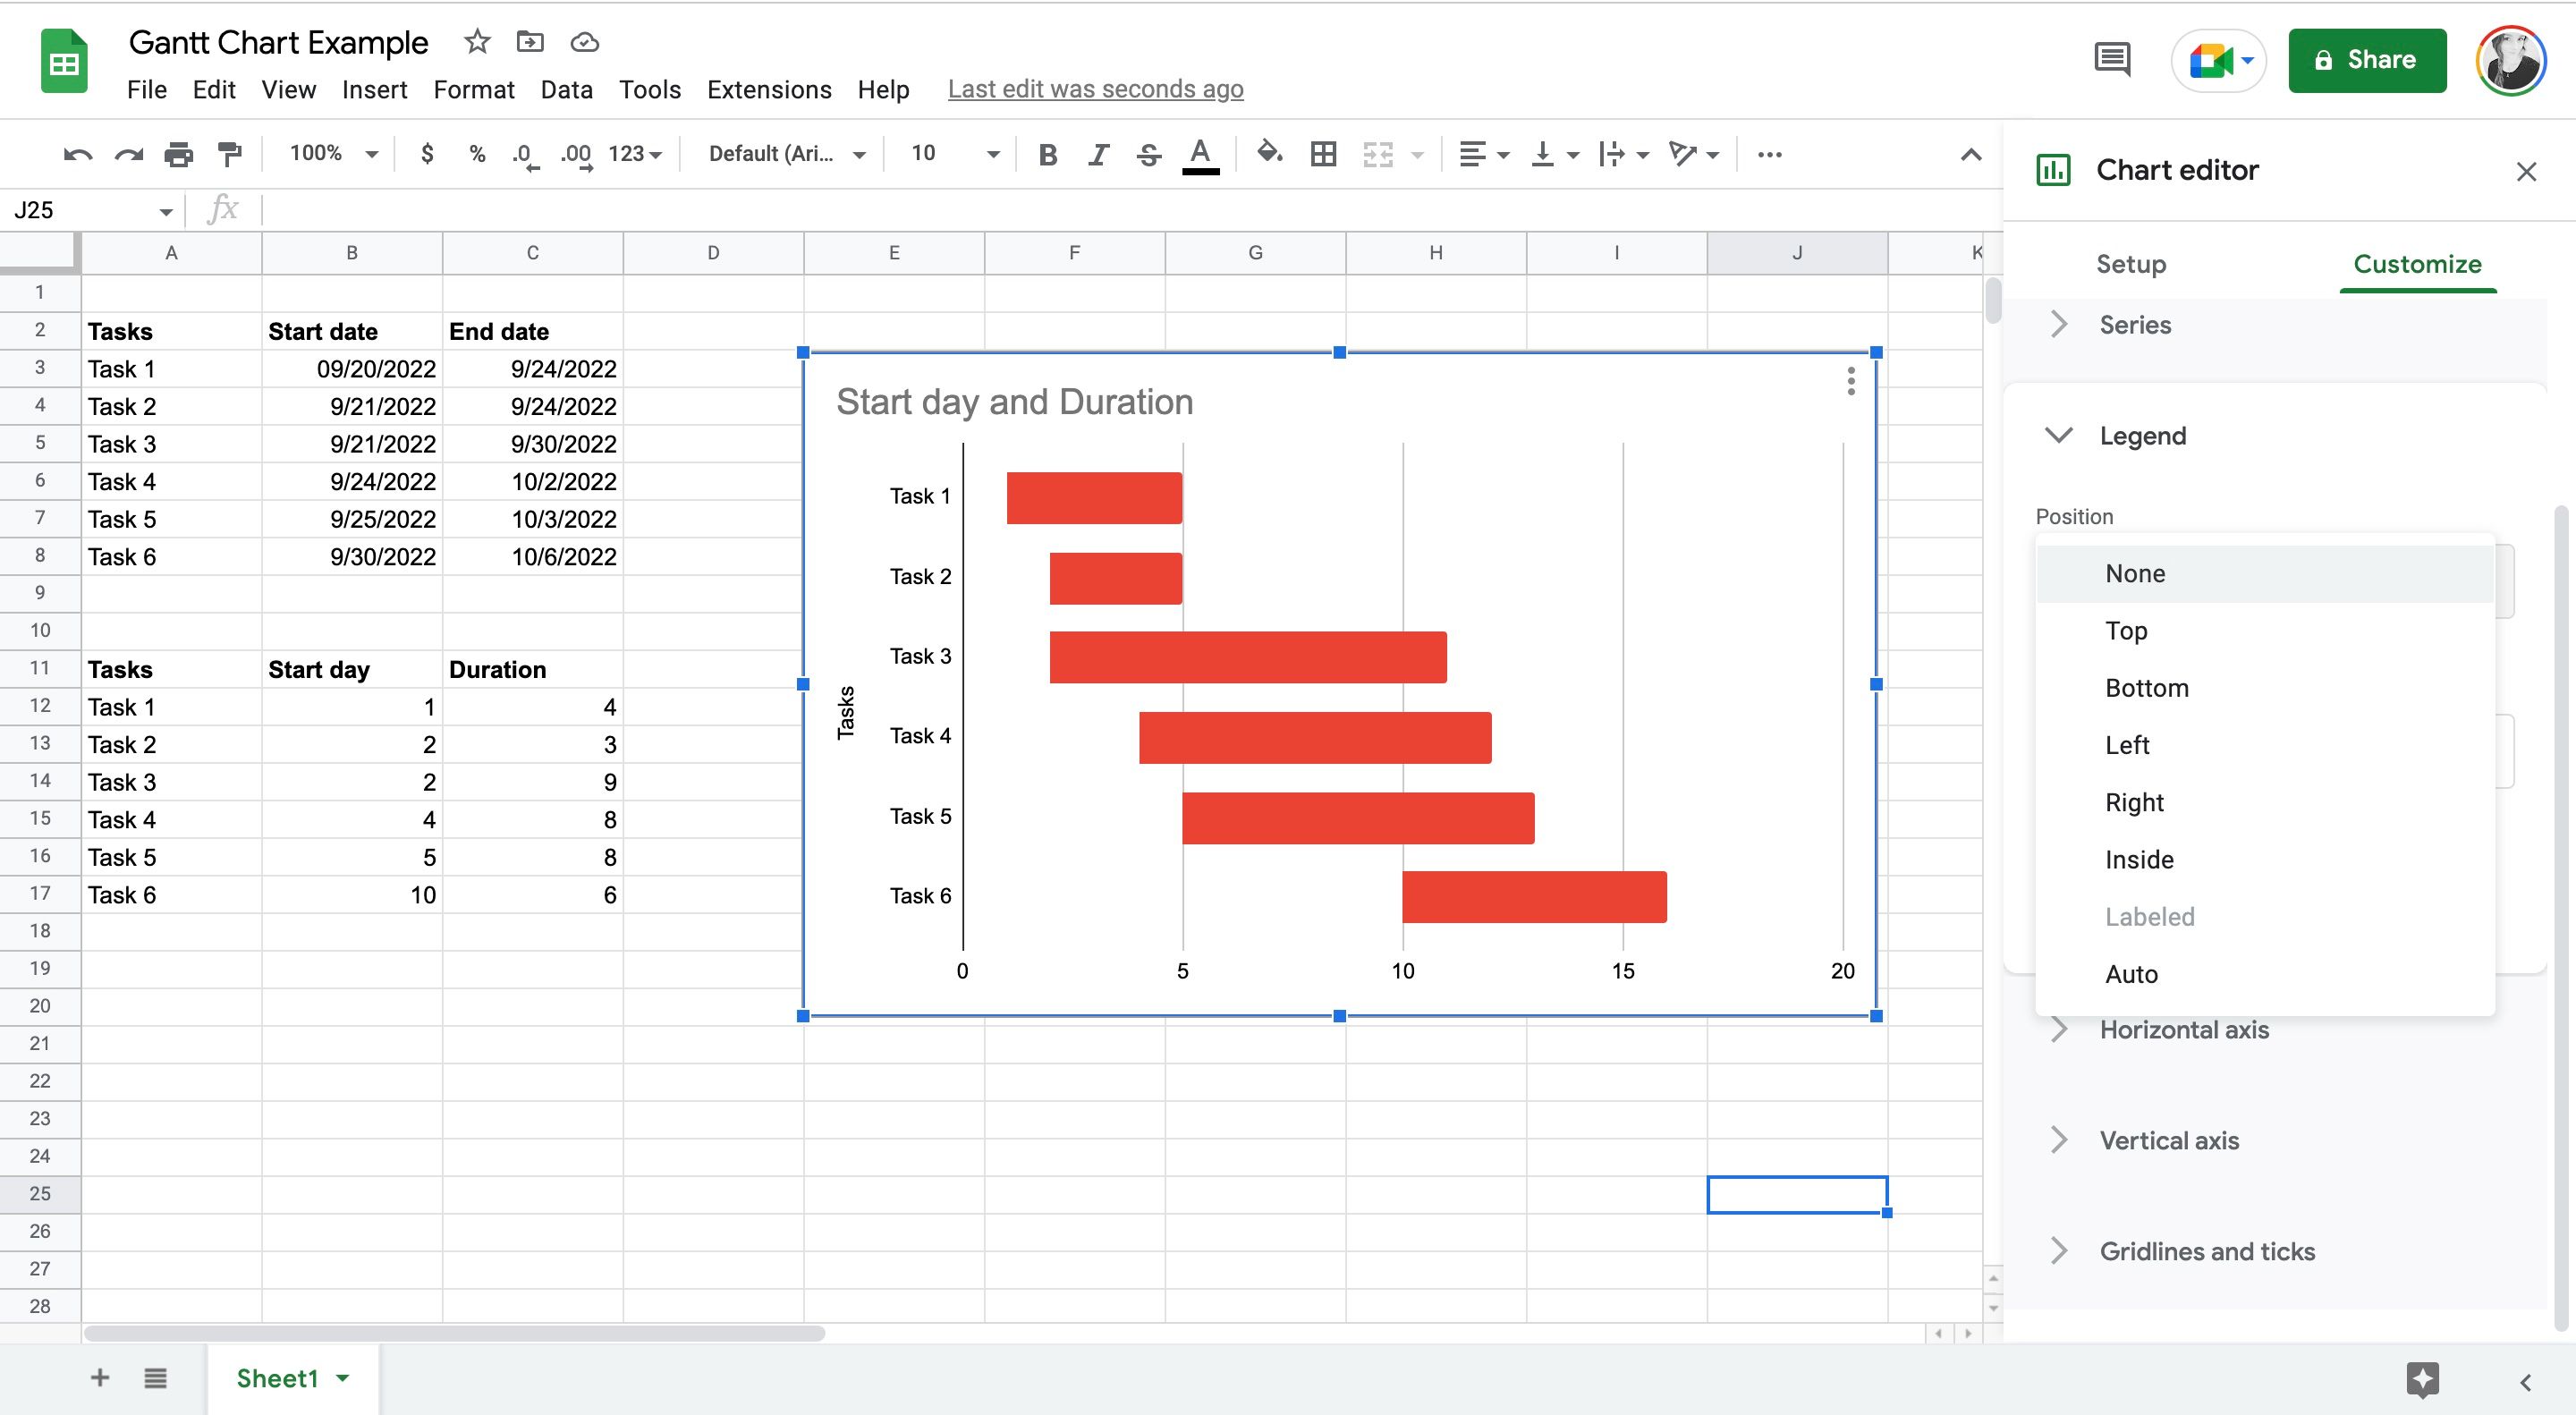 Removing the legend from Gantt chart in Sheets